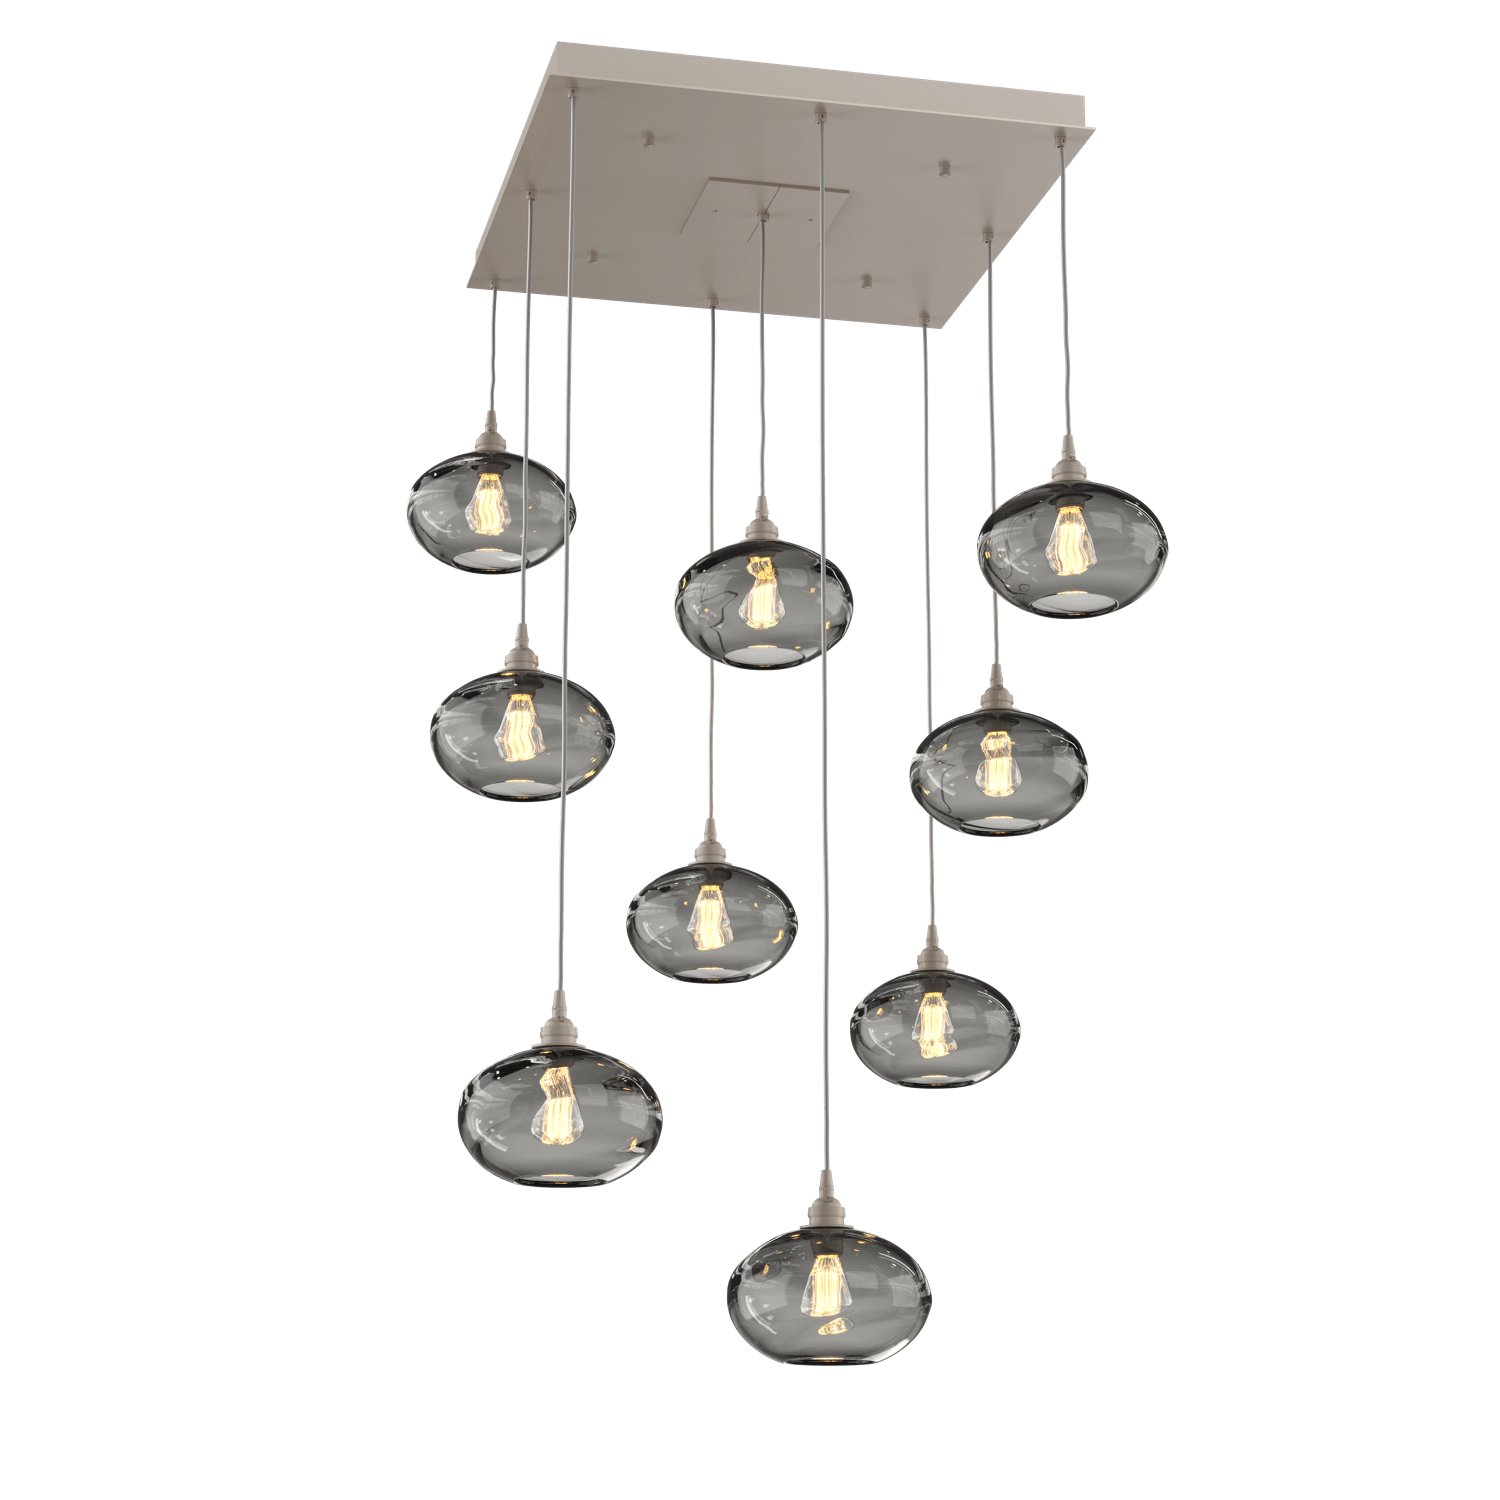 CHB0036-09-BS-OS-Hammerton-Studio-Optic-Blown-Glass-Coppa-9-light-square-pendant-chandelier-with-metallic-beige-silver-finish-and-optic-smoke-blown-glass-shades-and-incandescent-lamping